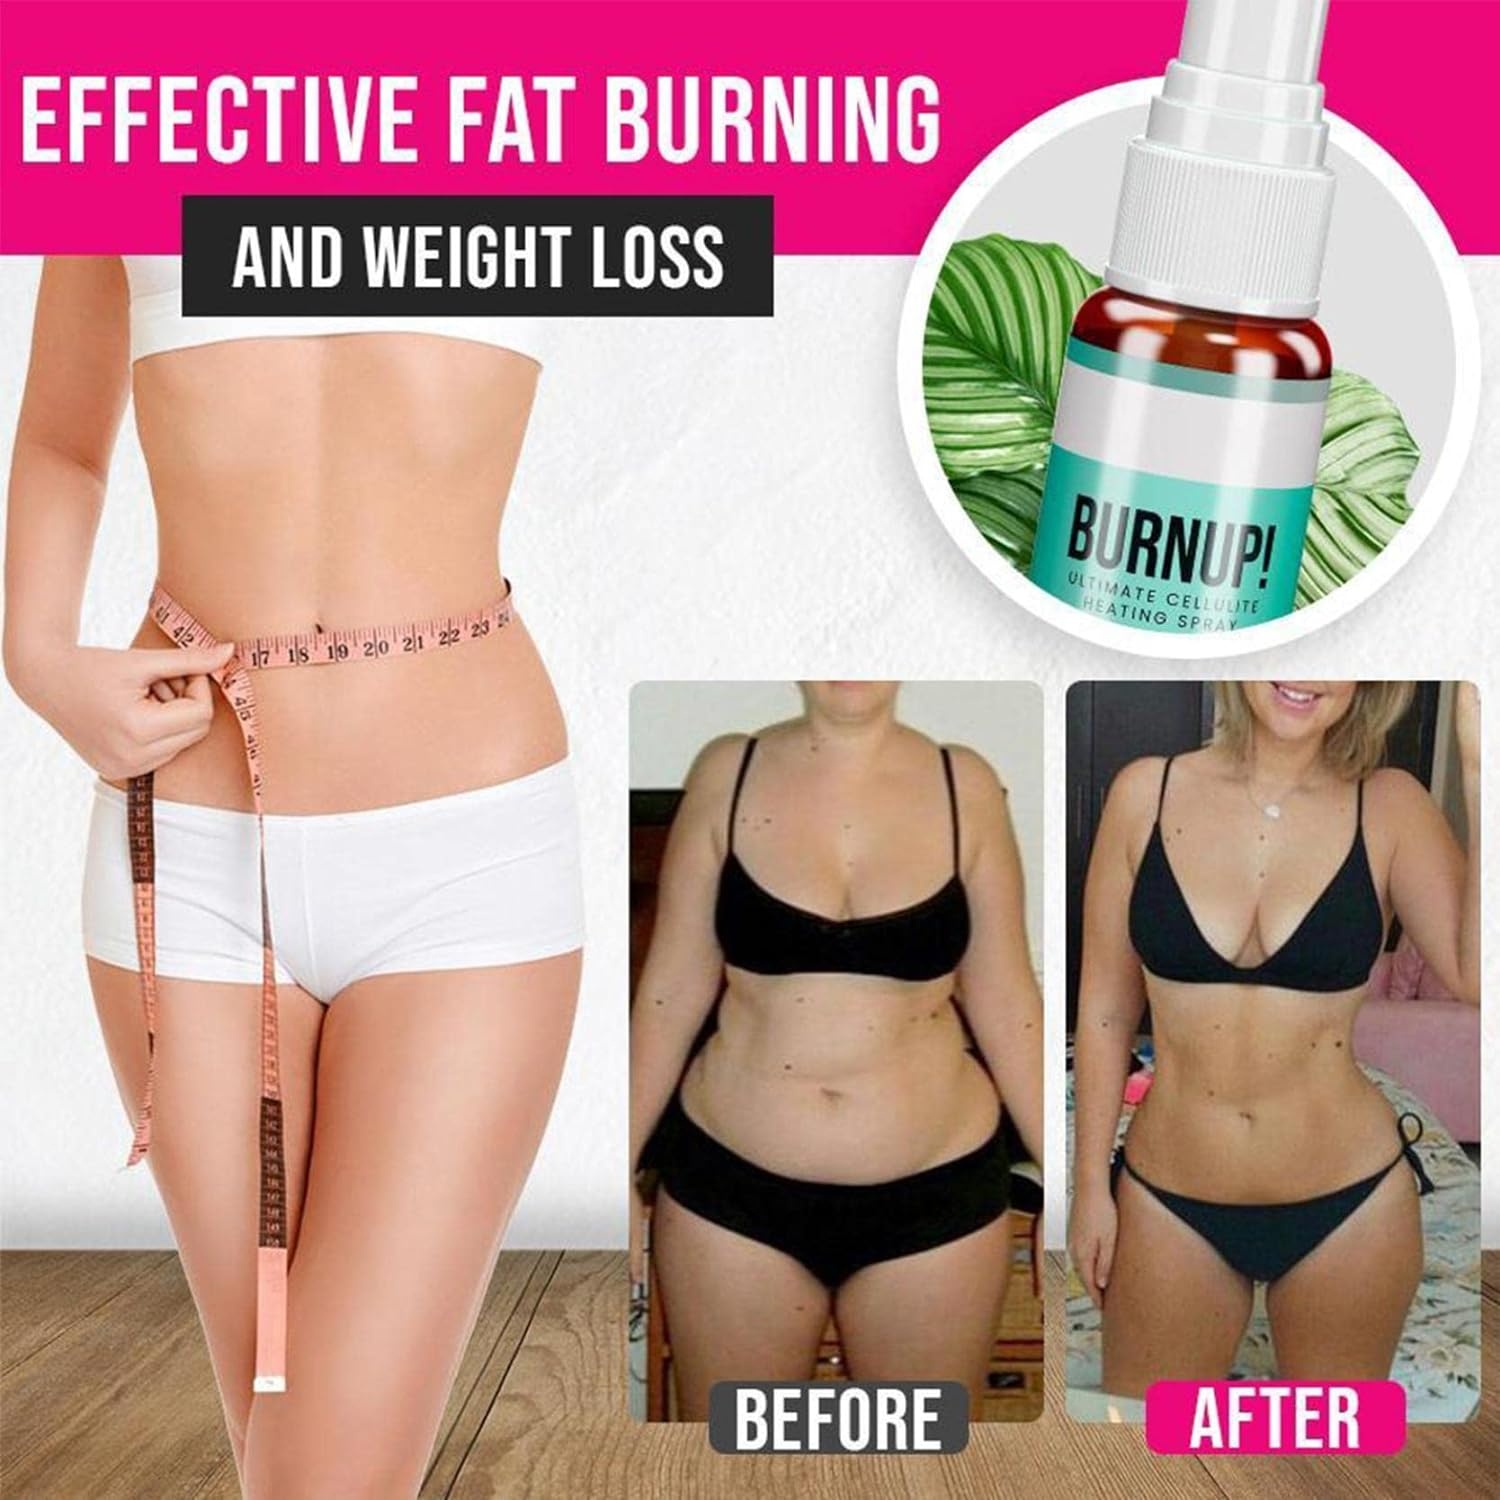 Ultimate Cellulite Heating Spray Tightening Cellulite Cream Improves Elasticity Plumps Sagging Skin Reduces Fat And Inhibits The Formation Of Fat Cells (1PCS)